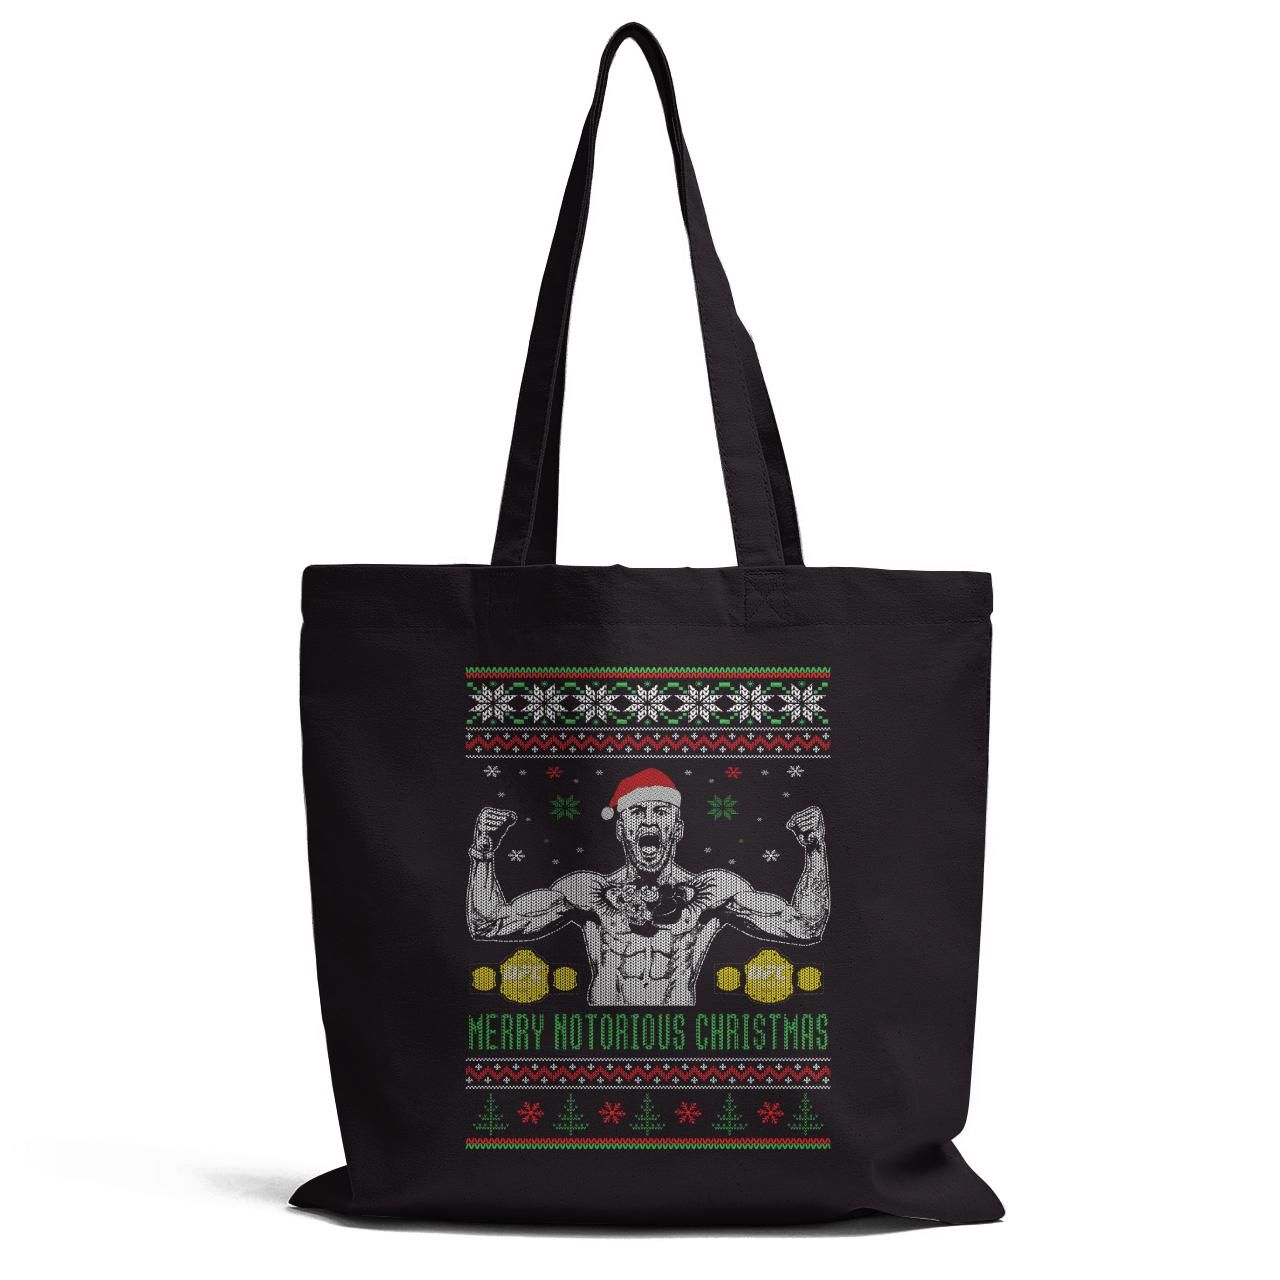 Merry Hotorious Christmas Tote Bag